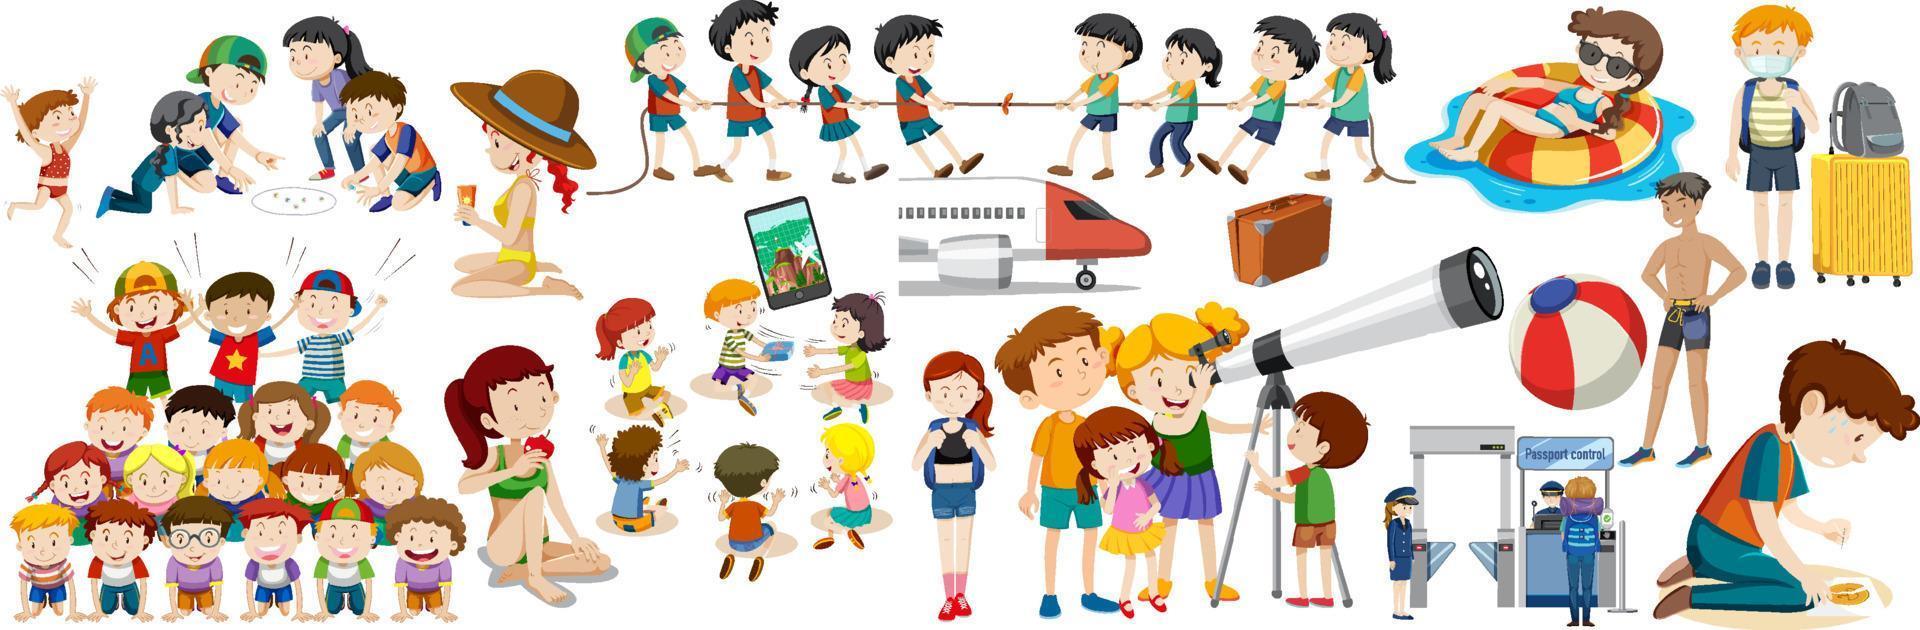 Set of people in different actions vector